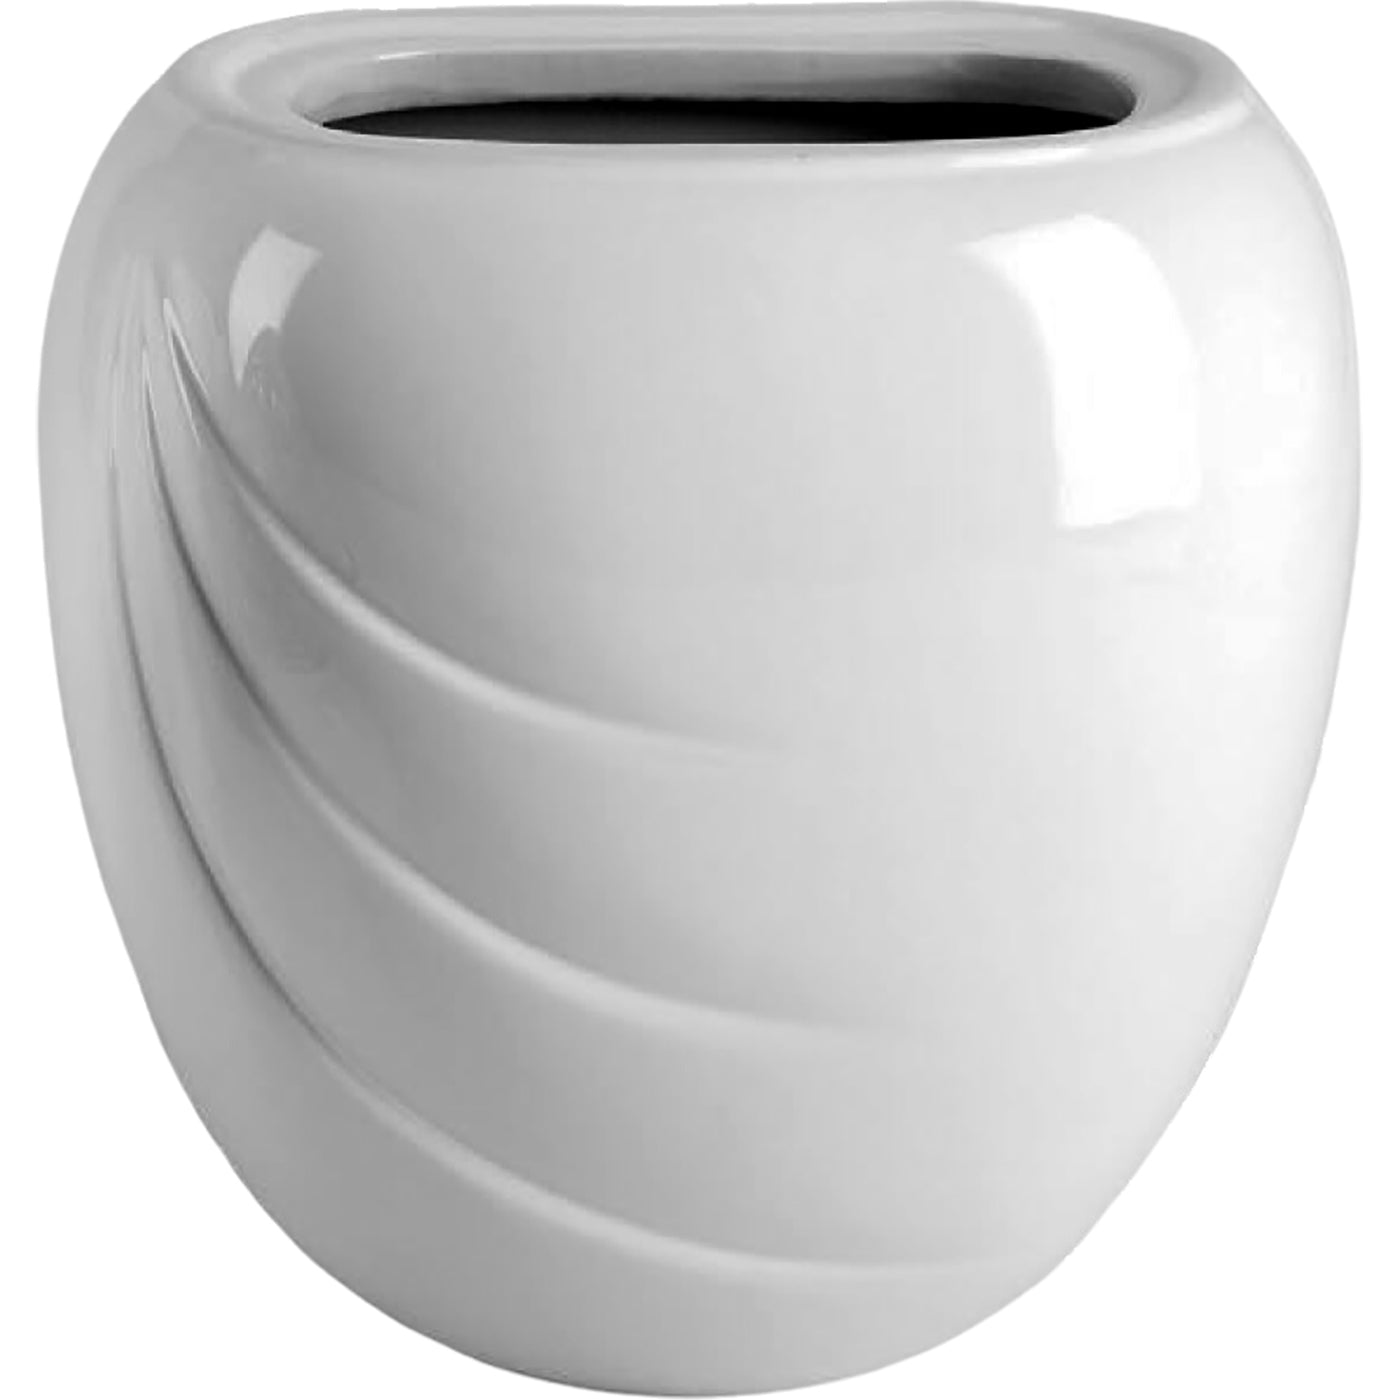 Rectangular grave vase Ecotre 19x17cm - 7.5x6.7in In white porcelain, wall attached ECO148P